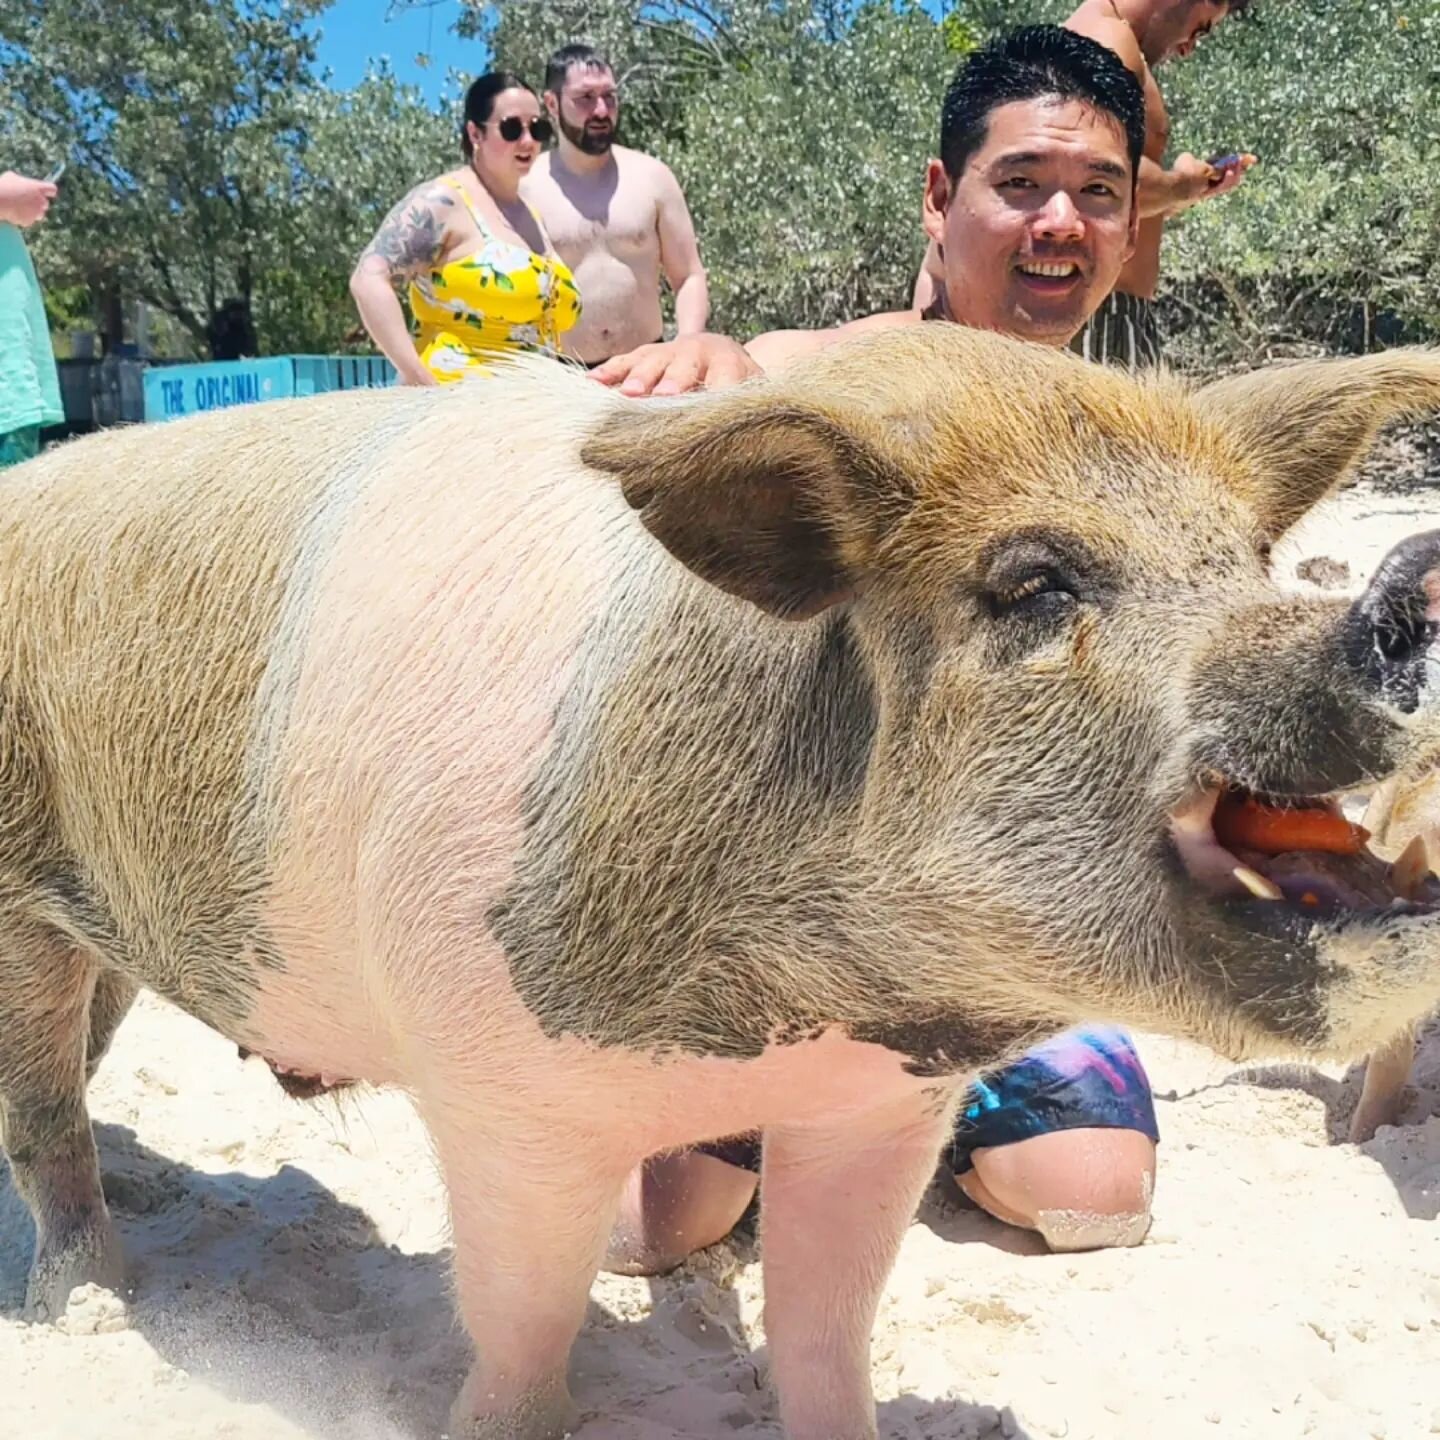 &quot;Swimming with Pigs&quot; is almost being bitten by pigs 🐖. Who knew pigs loved Wonderbread!

Public speaking note -the difference between enjoying what you're doing or not is fear. This applies to Swimming with Pigs and Public speaking. There'